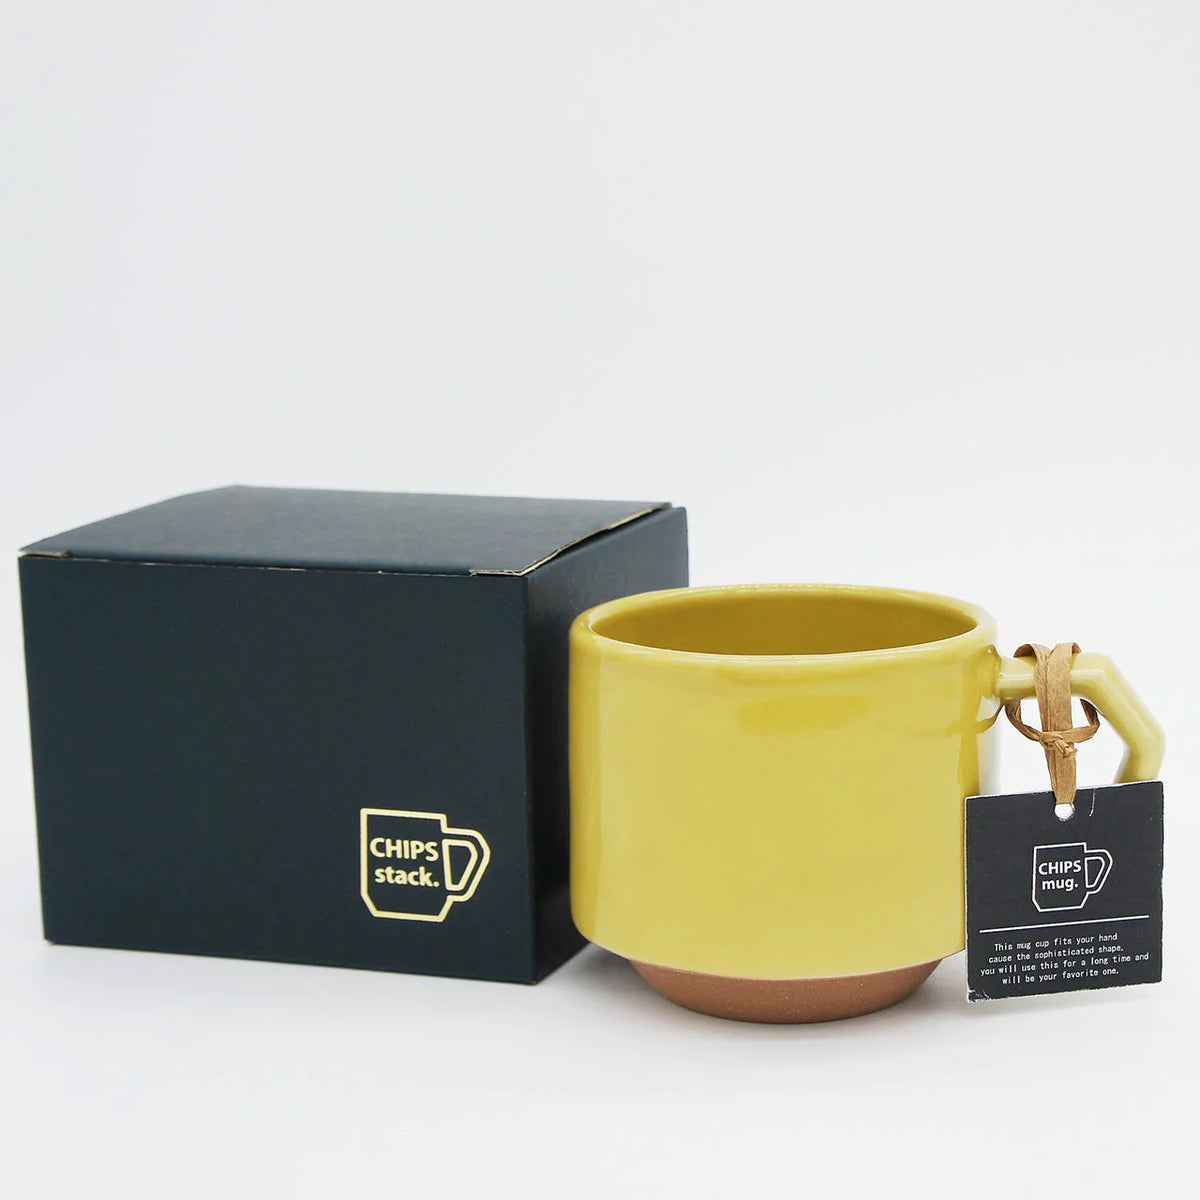 A Stacking Mug - Mustard from CHIPS Inc. with a black box and tag.